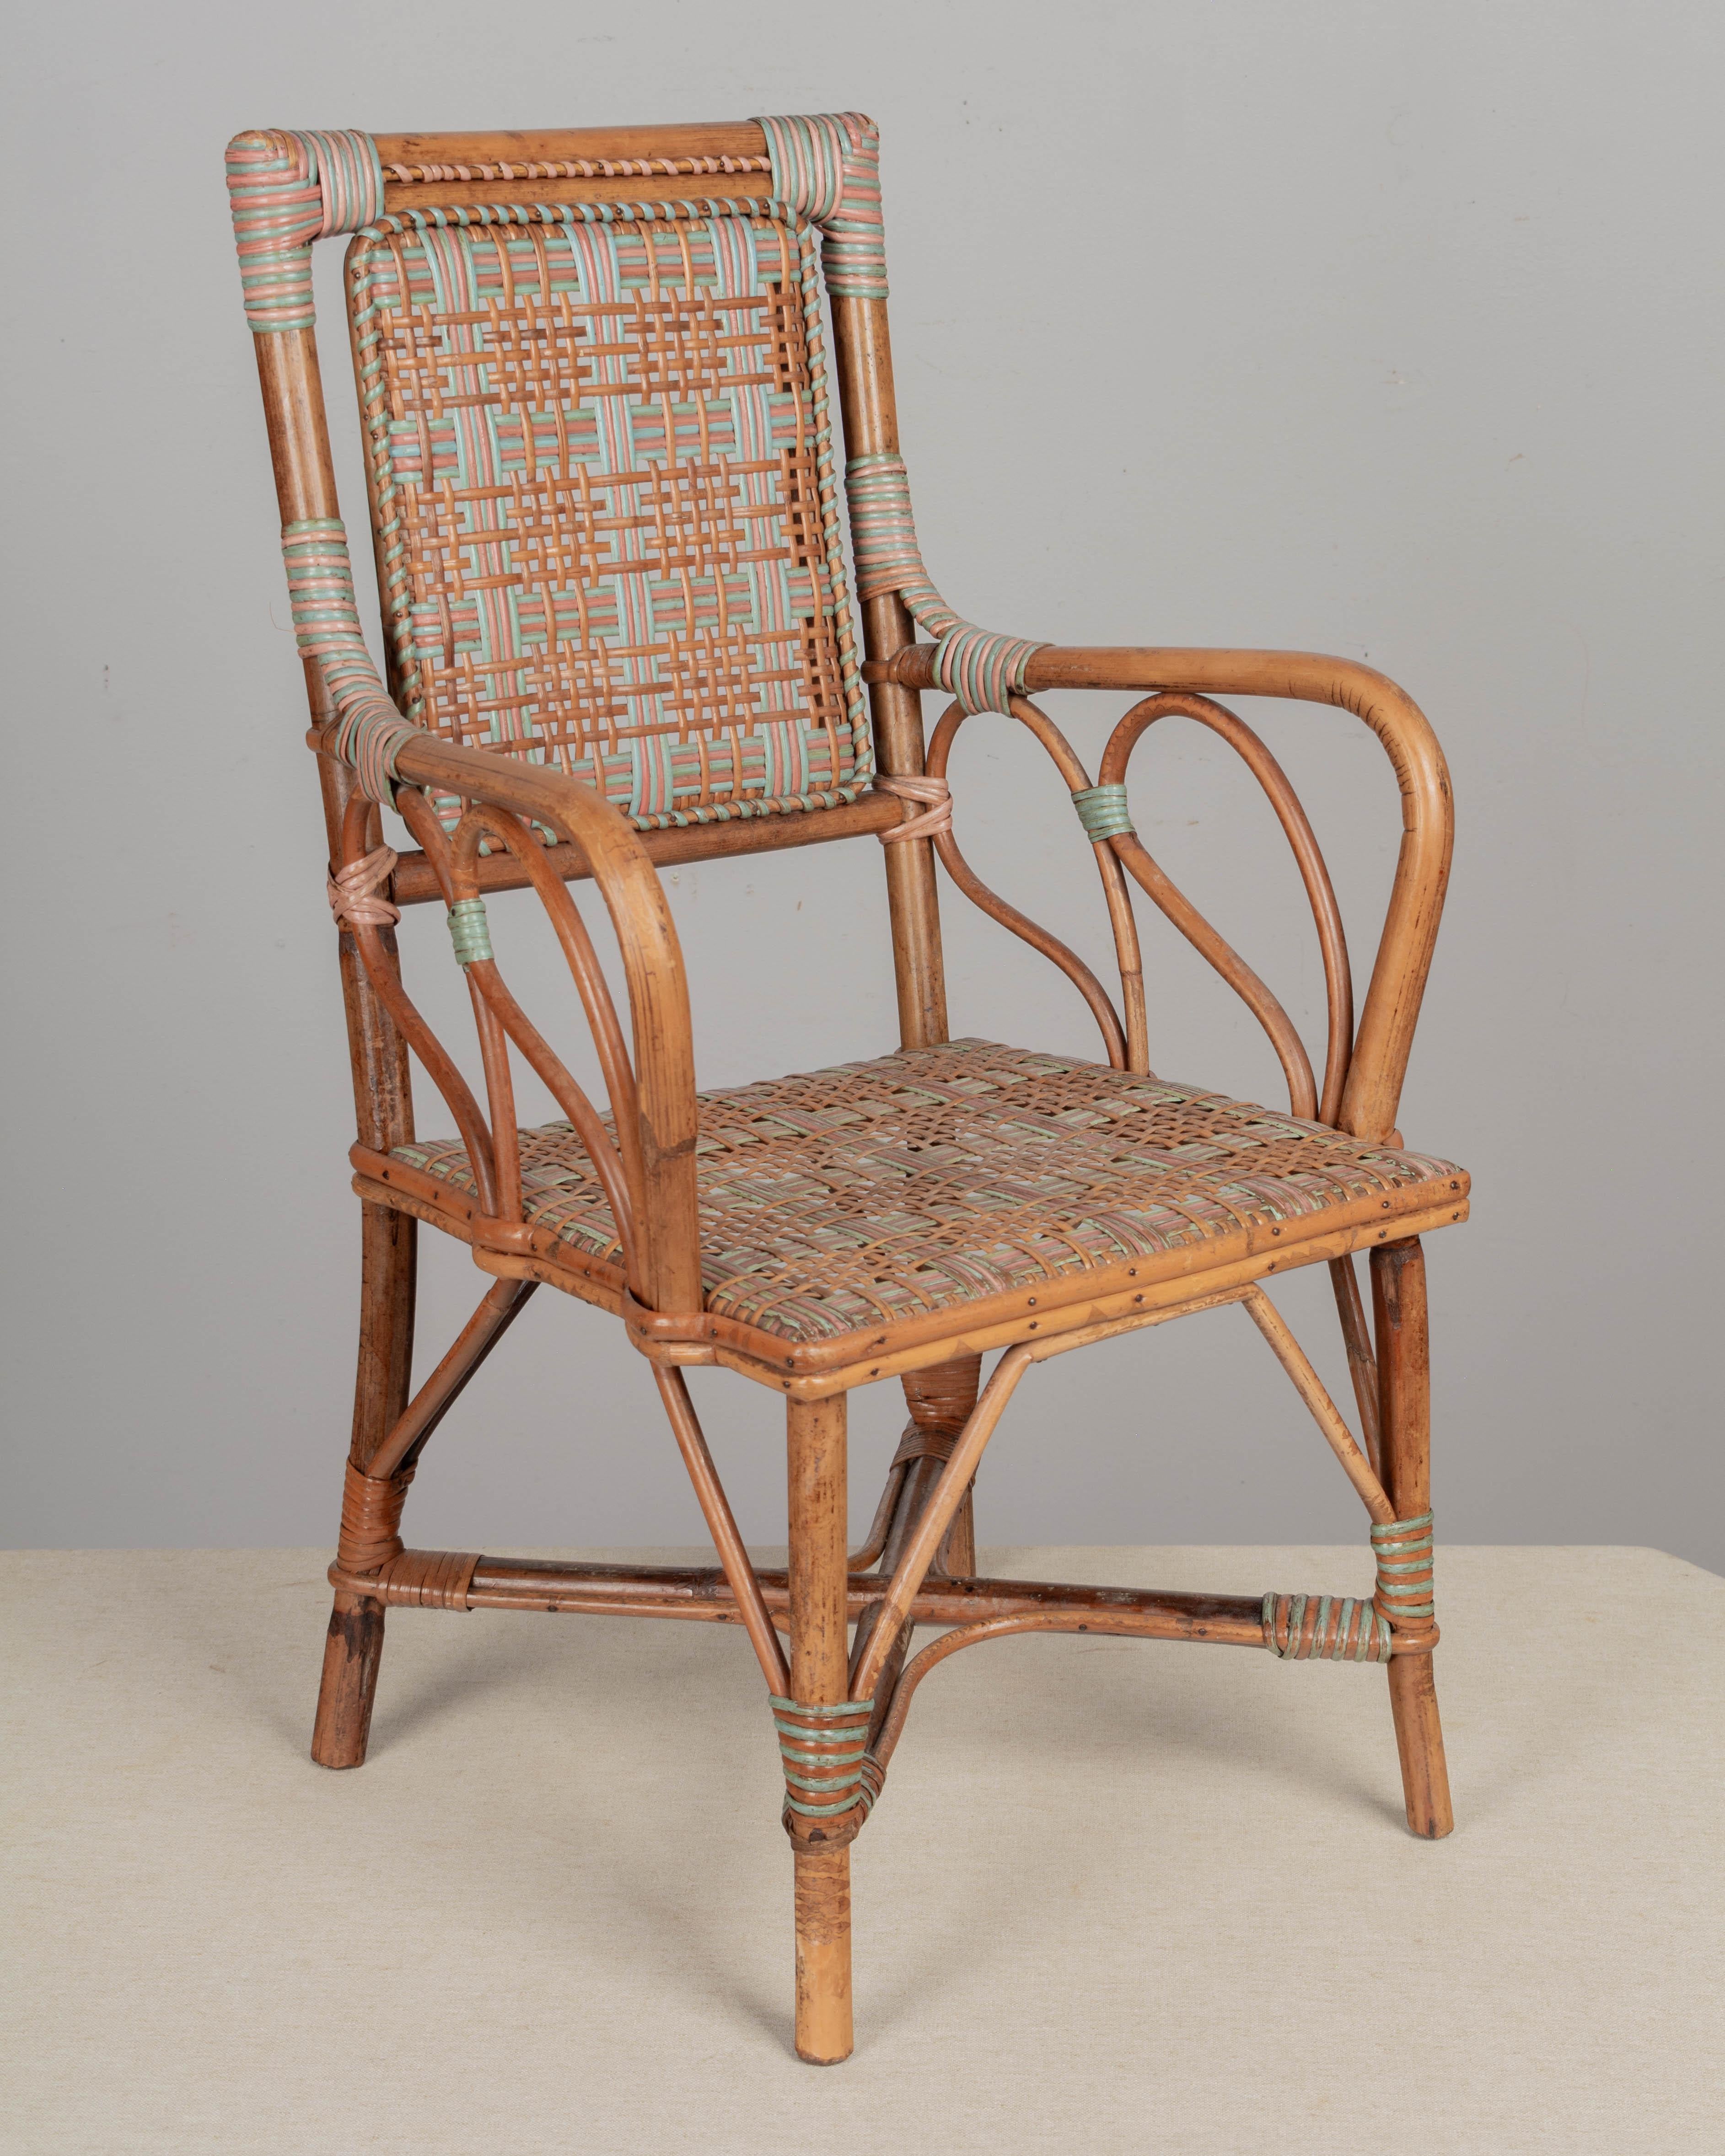 An early 20th century French child's chair with rattan frame and woven wicker seat and back. Good craftsmanship with pink and blue rattan woven in a plaid pattern. Circa 1900-1920
Dimensions: 15